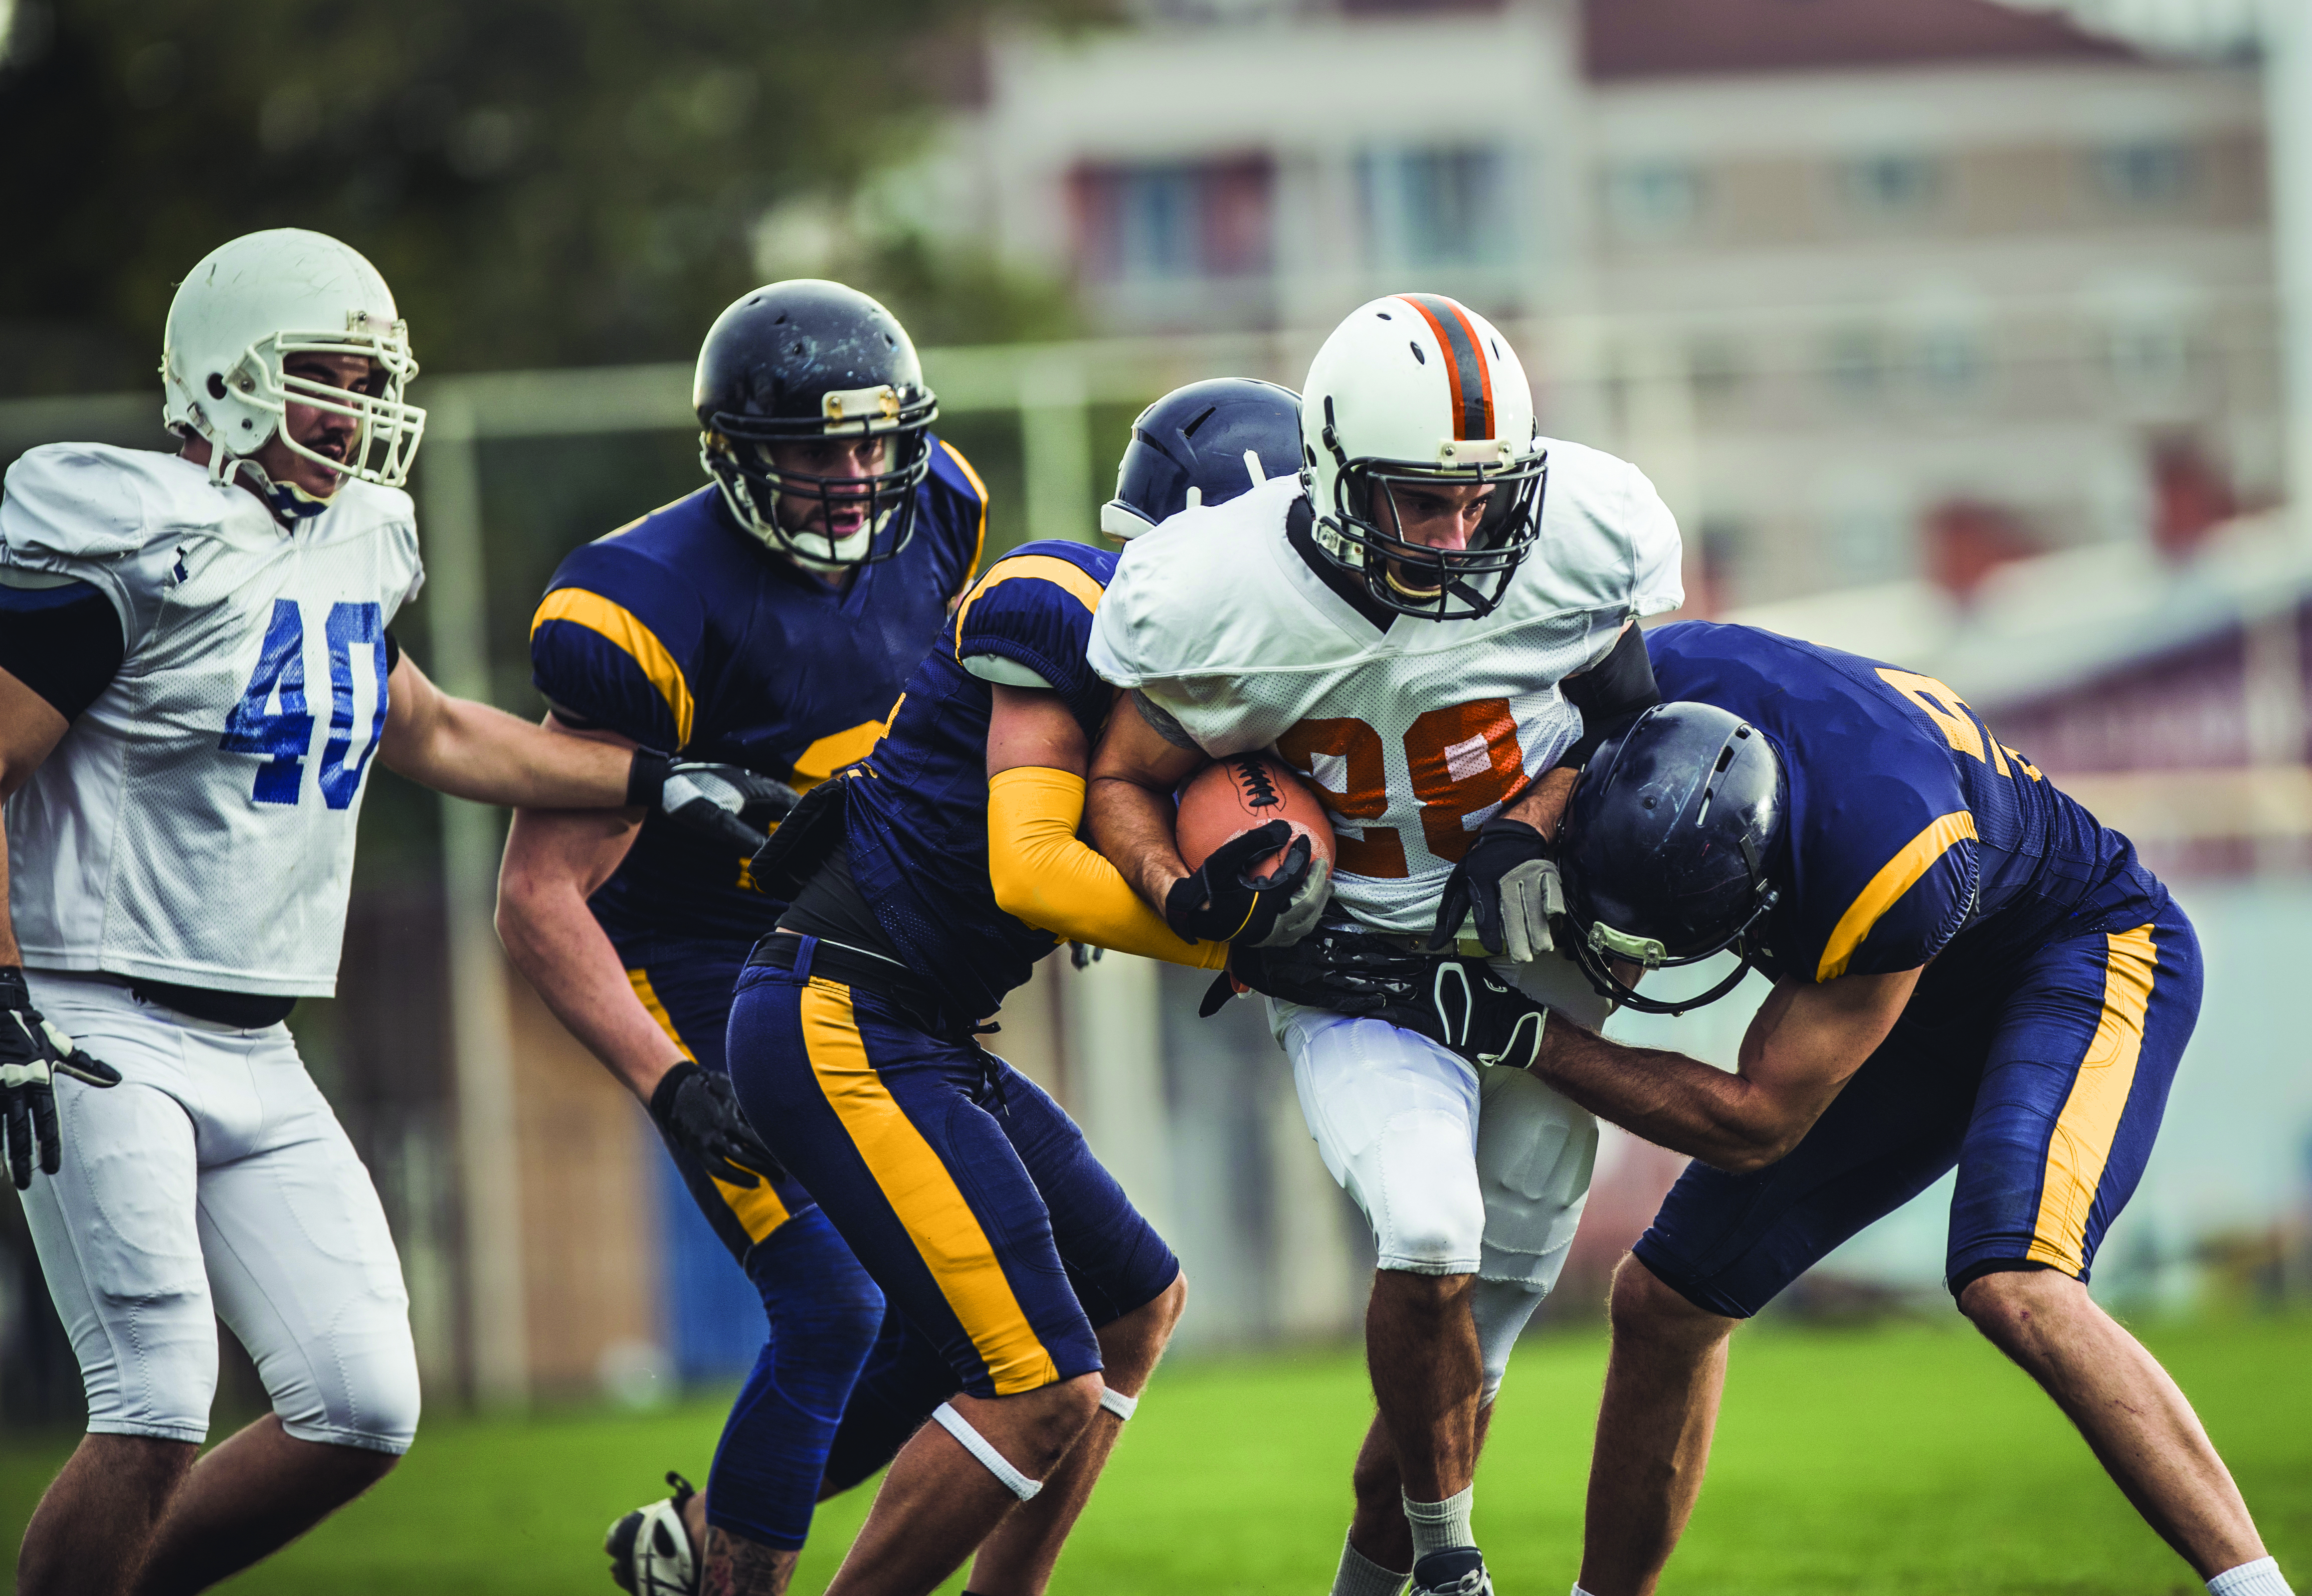 The Long-term Impact of Athlete-Centered Care